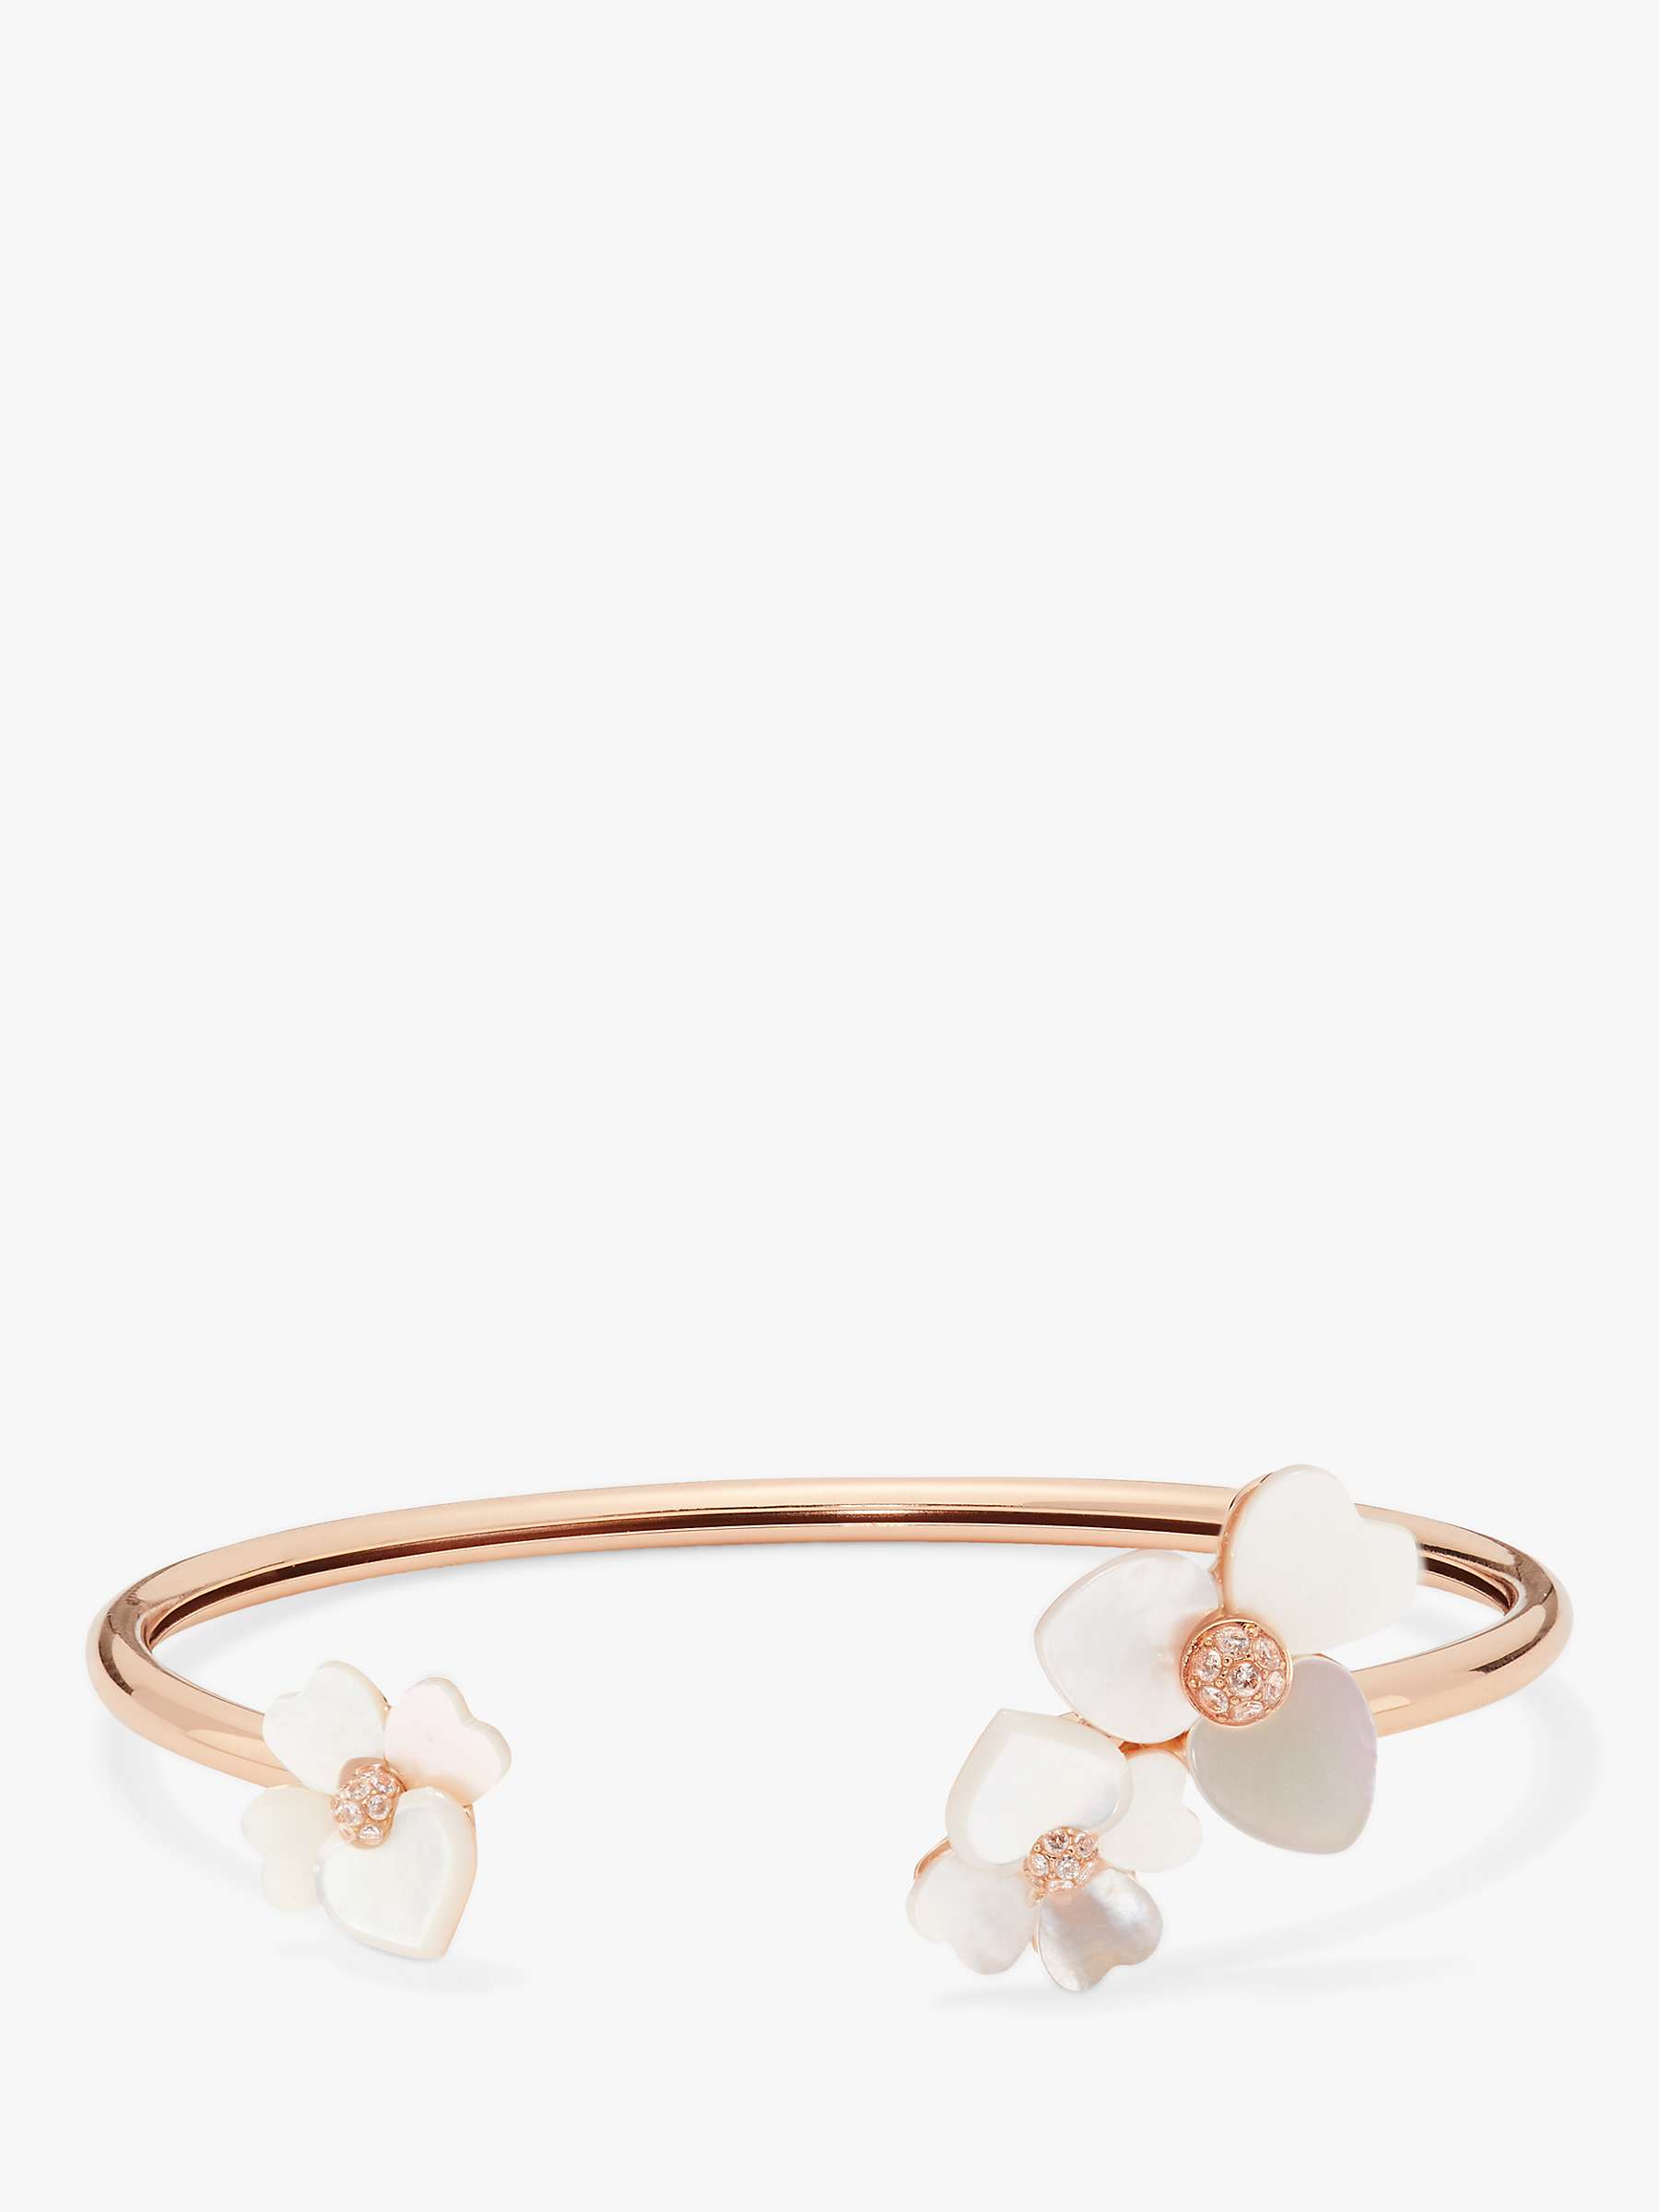 Buy kate spade new york Precious Pansy Open Bangle, Rose Gold Online at johnlewis.com